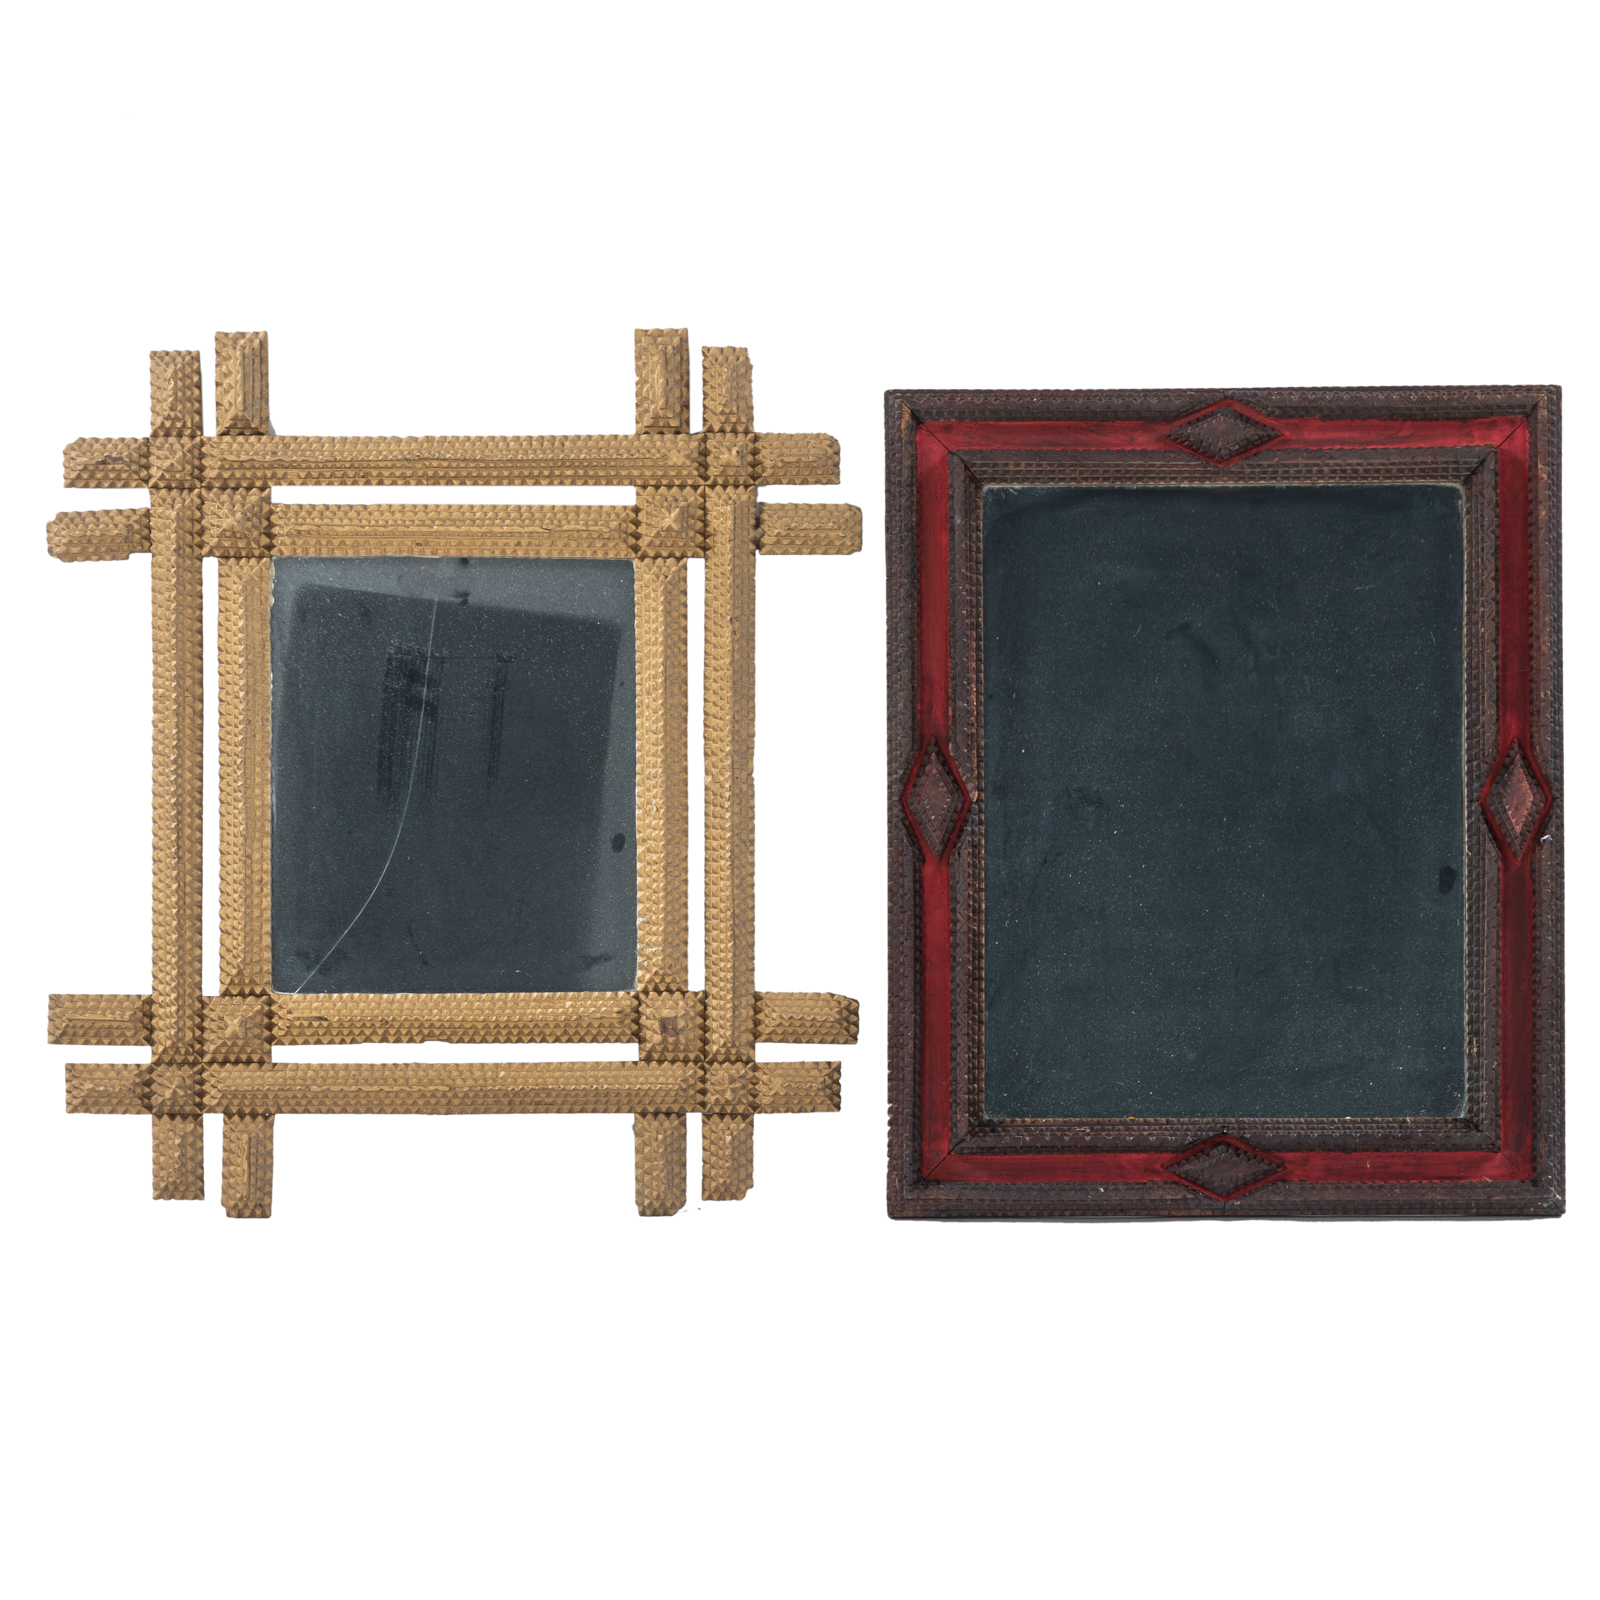 TWO TRAMP ART FRAMES WITH MIRRORED